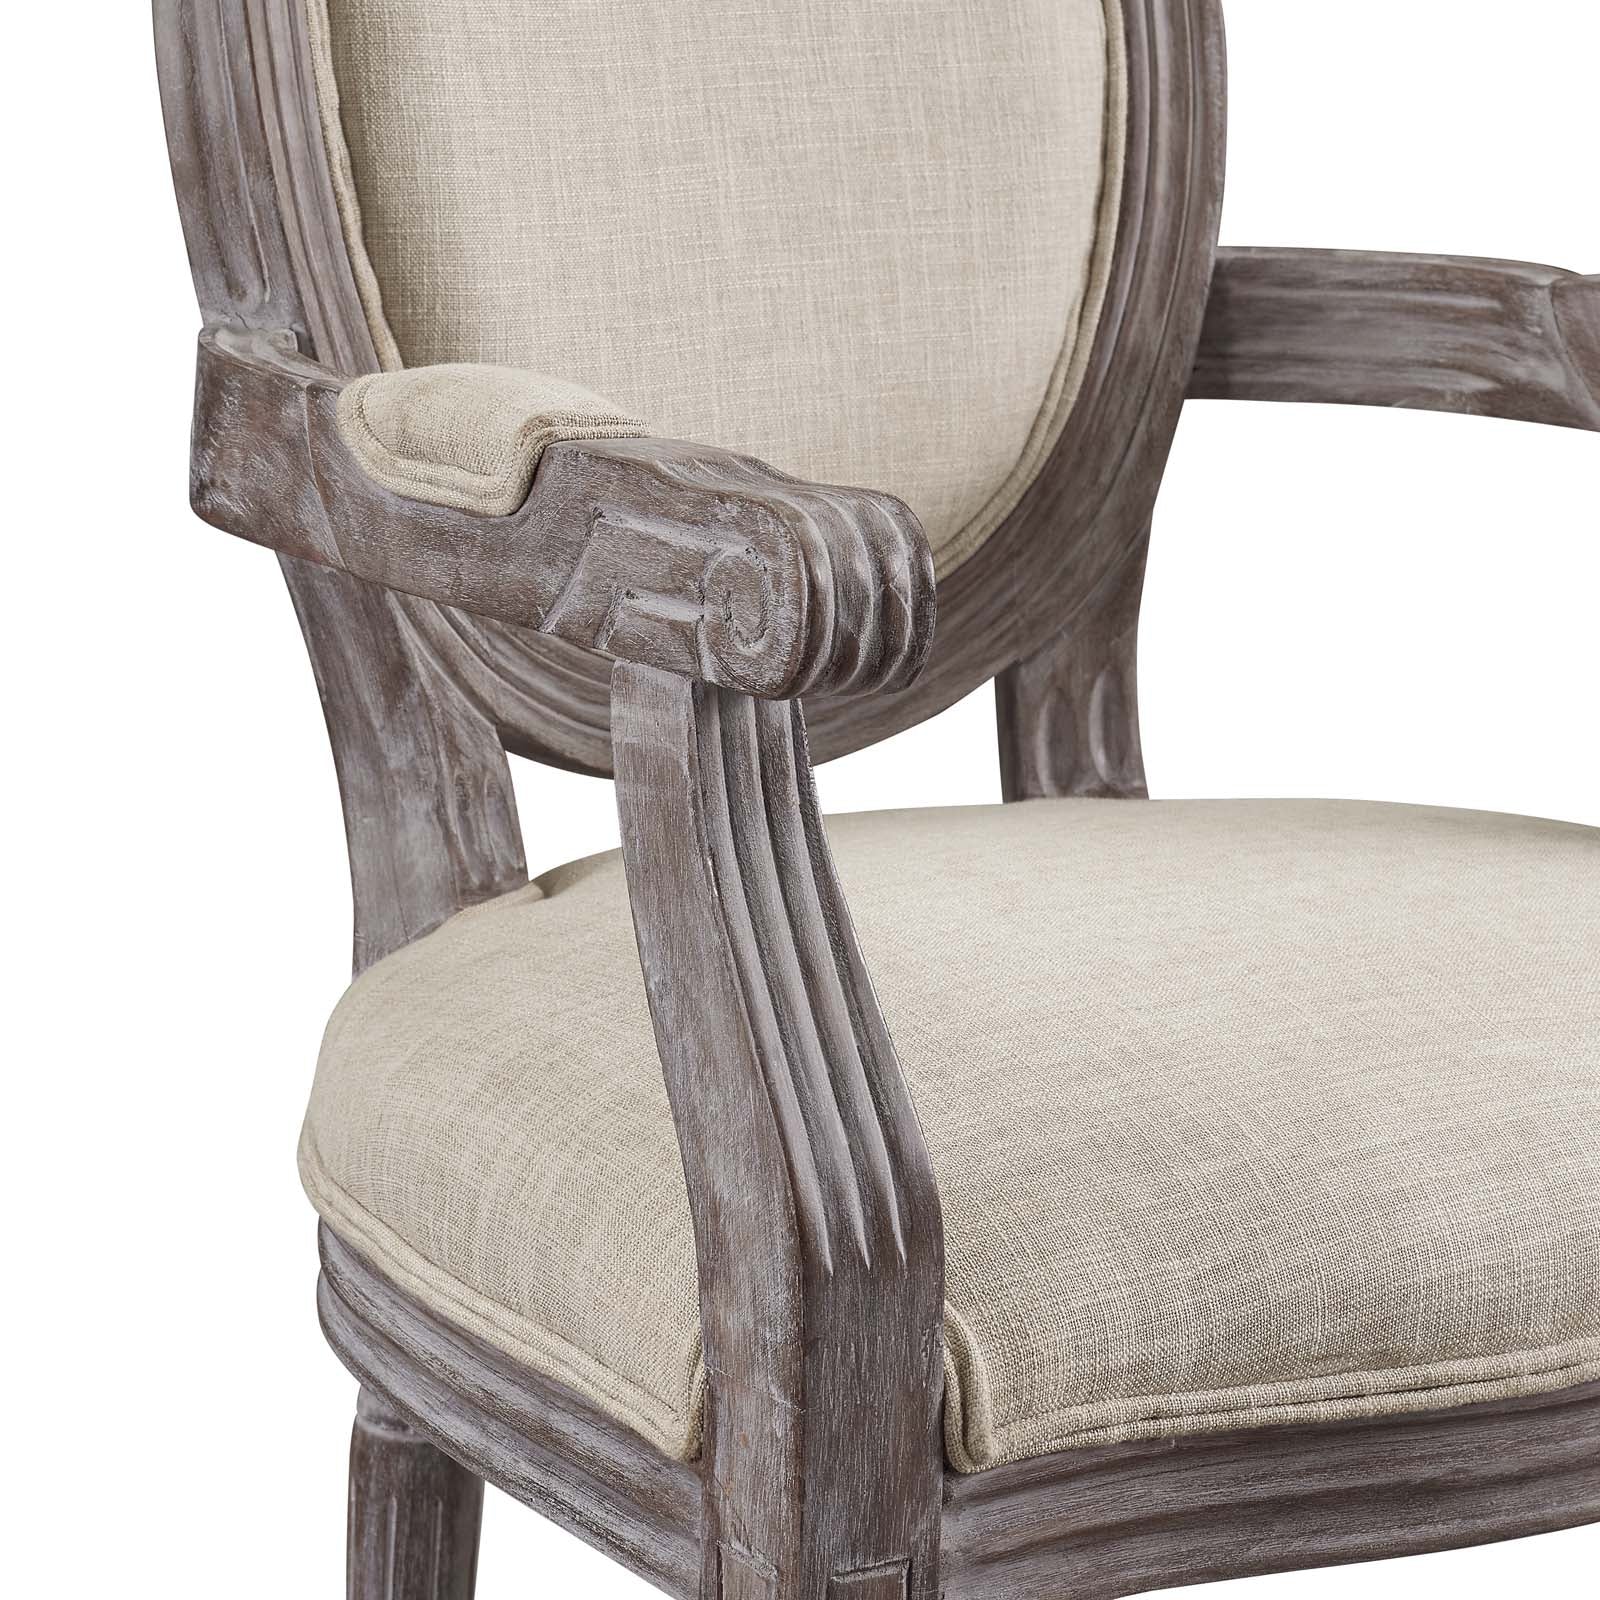 Emanate Vintage French Upholstered Fabric Dining Armchair - East Shore Modern Home Furnishings